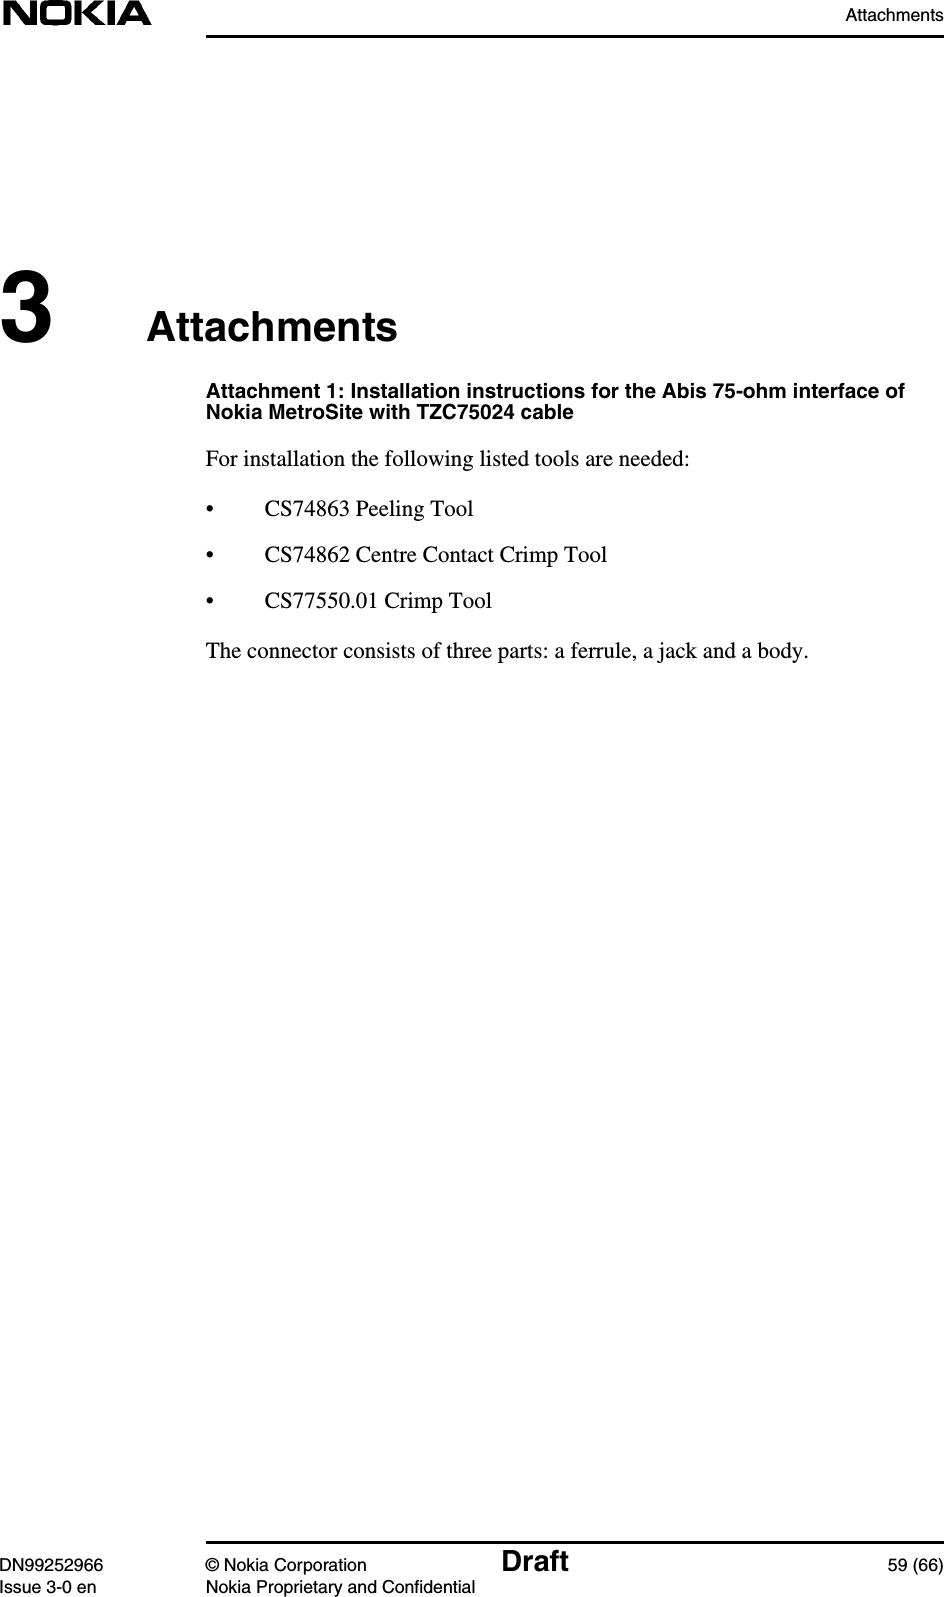 AttachmentsDN99252966 © Nokia Corporation Draft 59 (66)Issue 3-0 en Nokia Proprietary and Confidential3AttachmentsAttachment 1: Installation instructions for the Abis 75-ohm interface ofNokia MetroSite with TZC75024 cableFor installation the following listed tools are needed:• CS74863 Peeling Tool• CS74862 Centre Contact Crimp Tool• CS77550.01 Crimp ToolThe connector consists of three parts: a ferrule, a jack and a body.